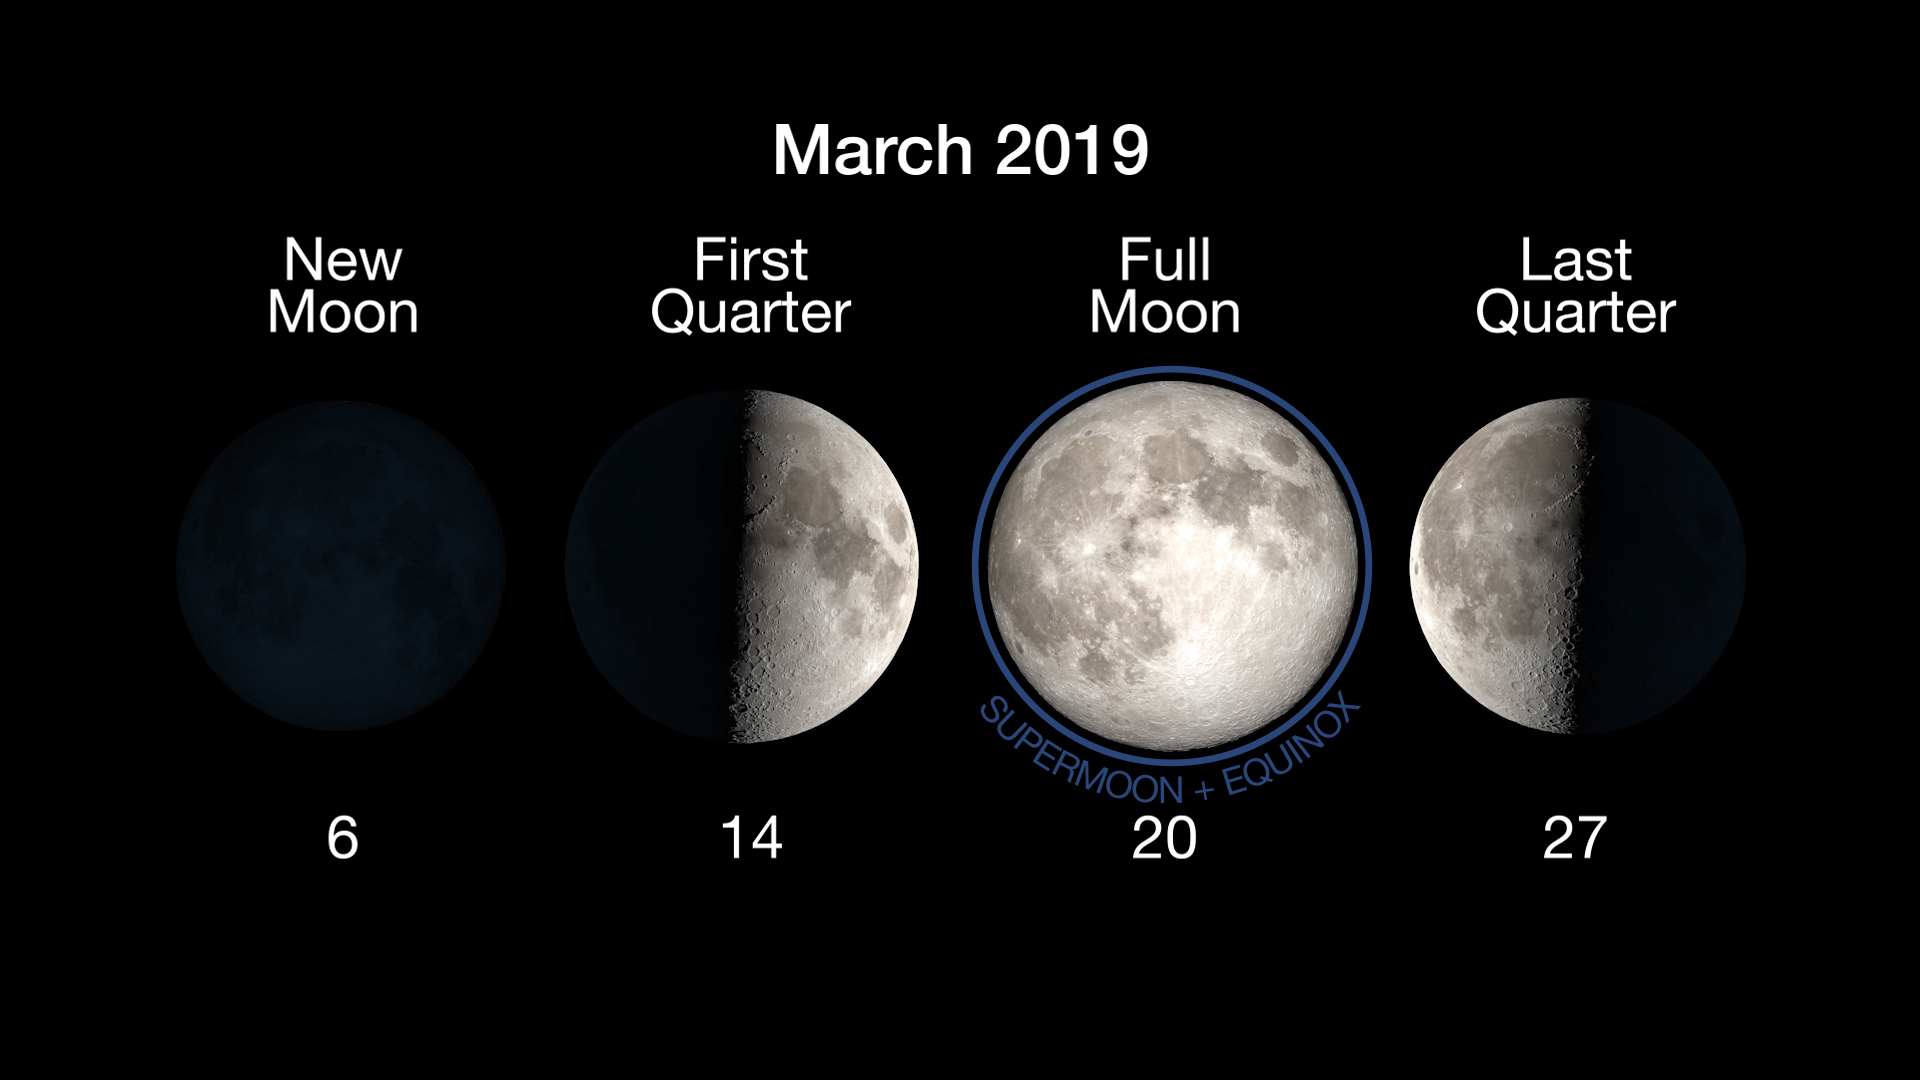 what-s-up-march-2019-skywatching-from-nasa-nasa-solar-system-exploration